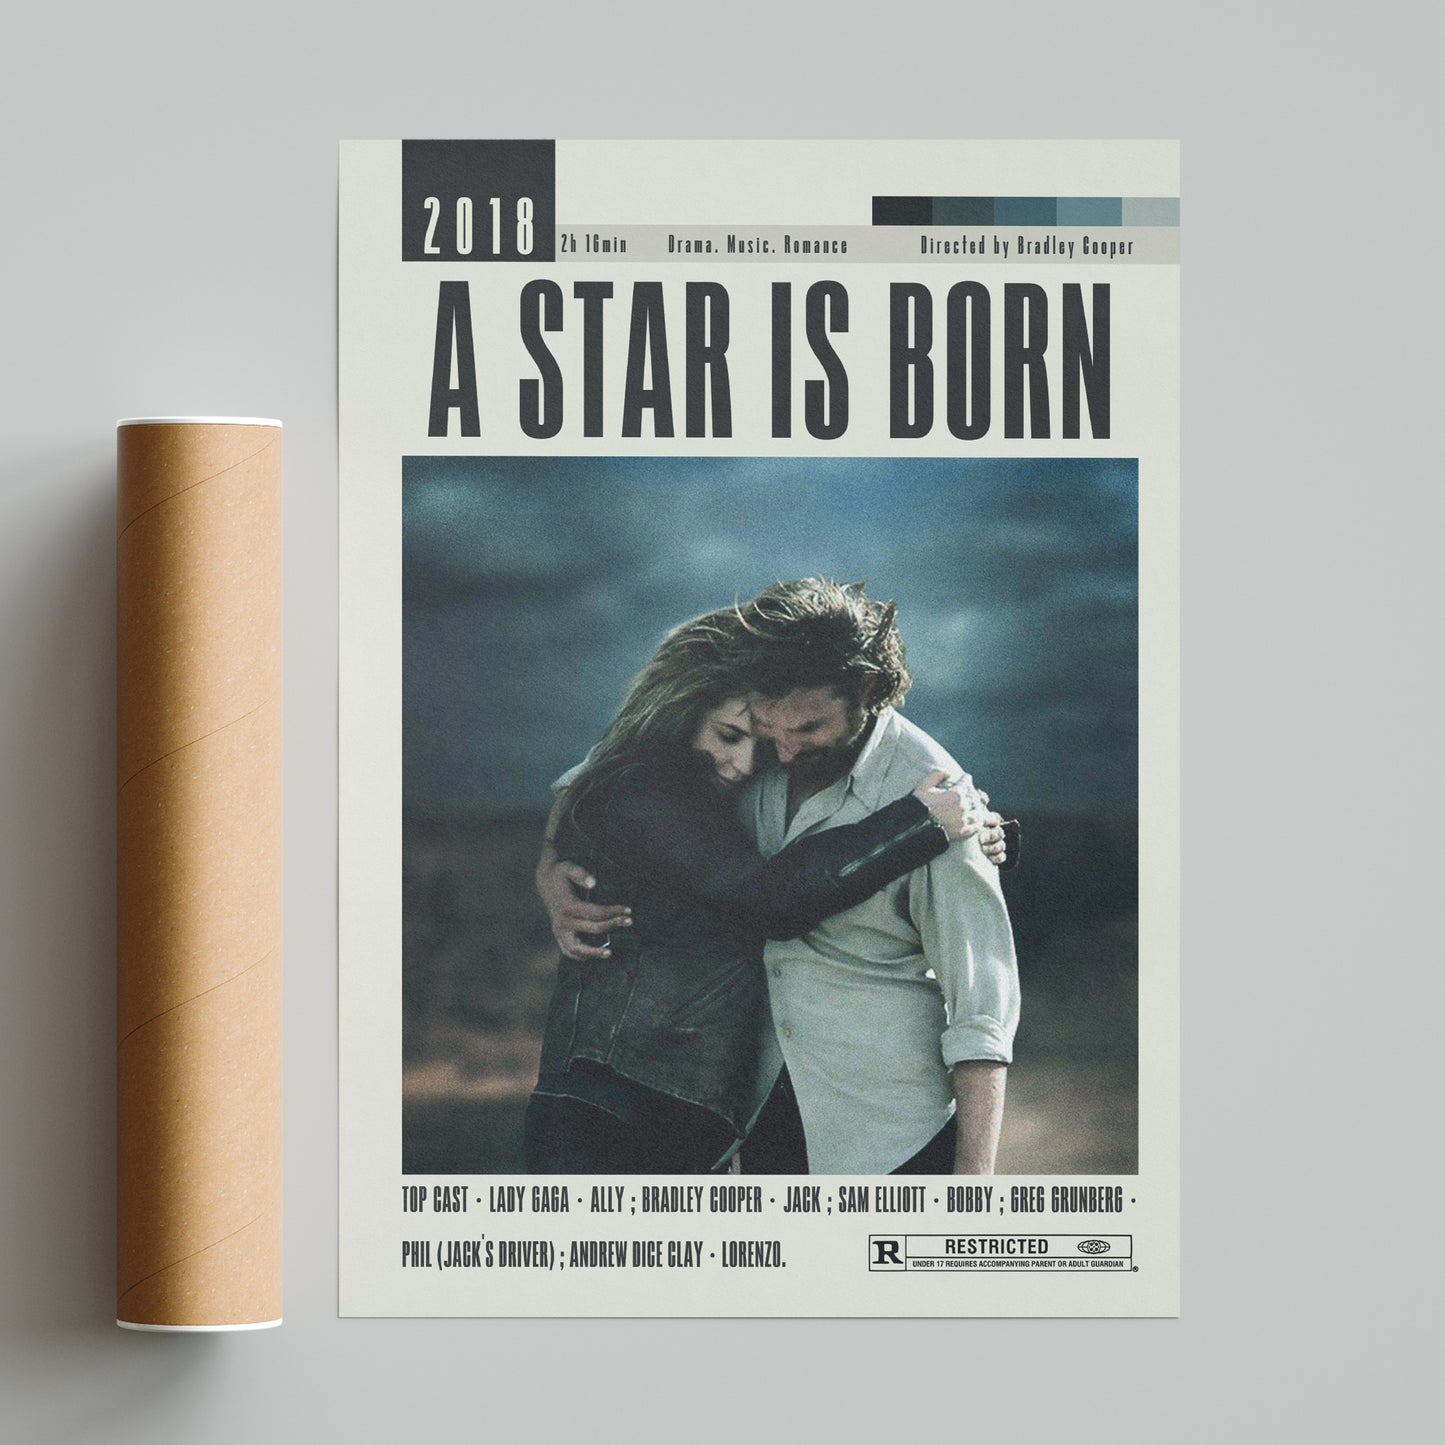 This A Star Is Born Poster is a must-have for any Bradley Cooper movie fan. With its vintage retro art print and minimalist design, it adds a touch of elegance to any room. The 98 types of movie posters cater to all tastes and preferences, while the various sizes make it suitable for any wall space. Displaying the top cast, duration, director, and most famous scene, it's not just a poster but a piece of movie history.